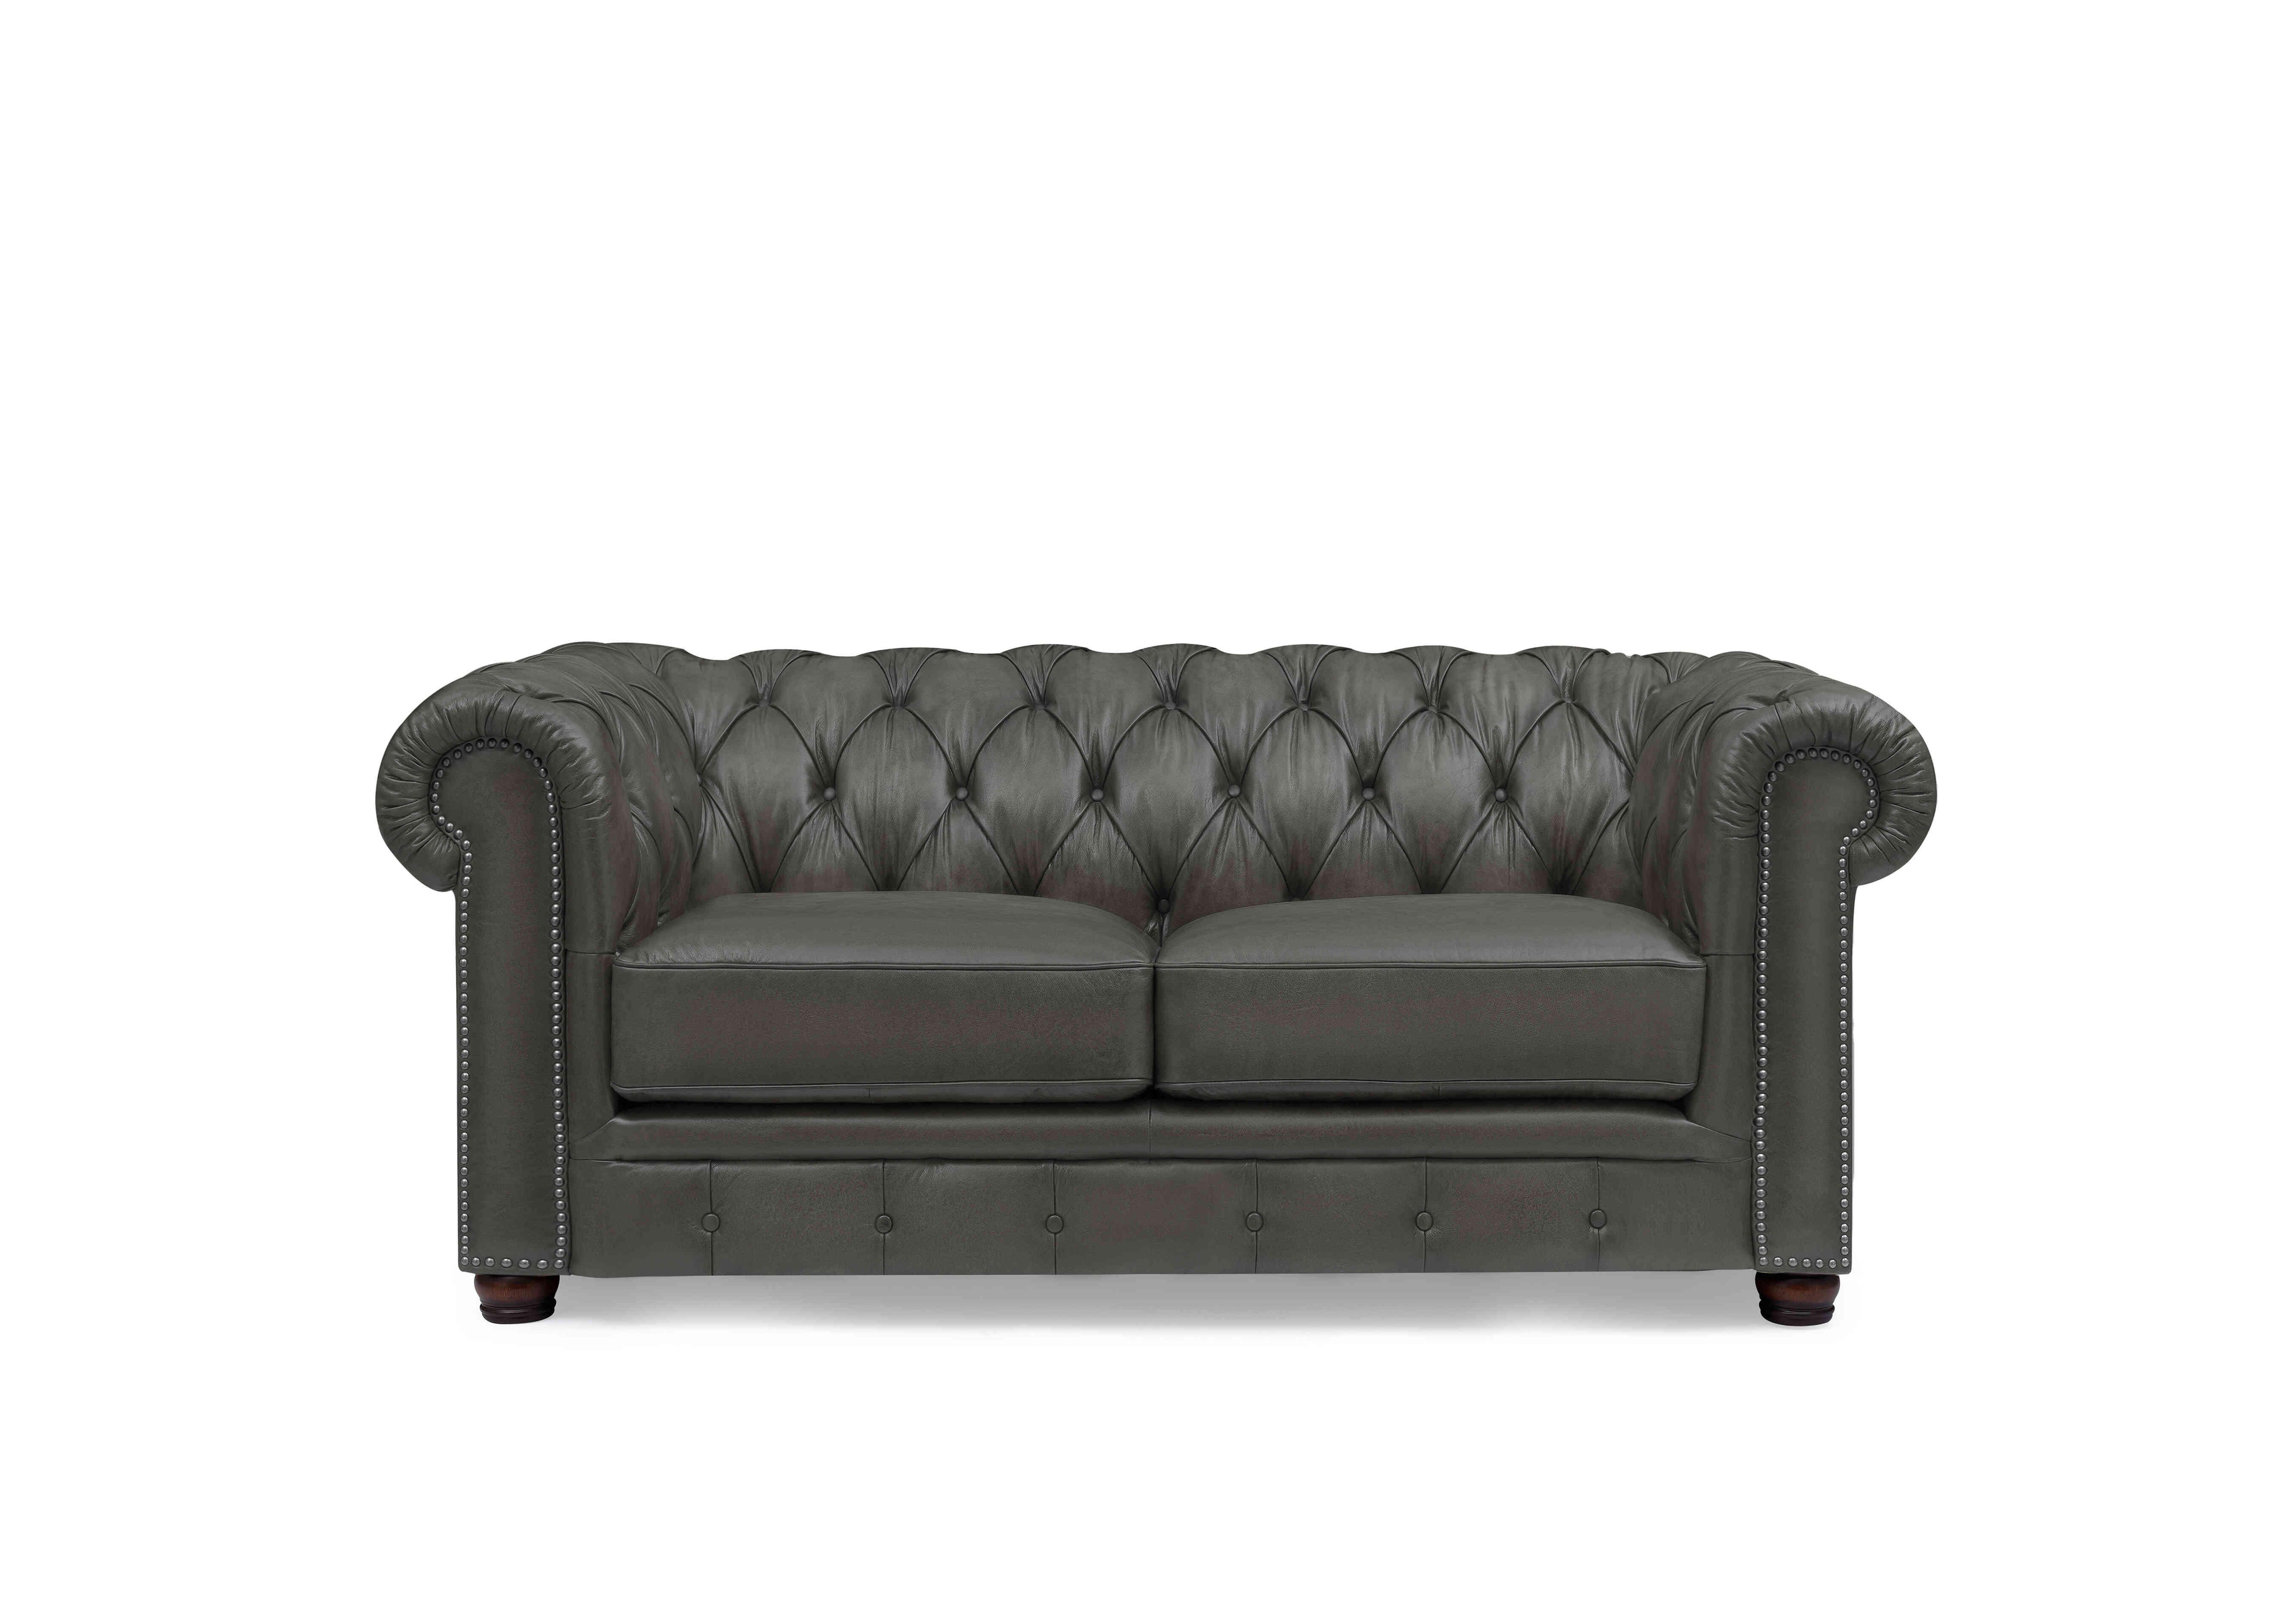 Shackleton 2 Seater Leather Chesterfield Sofa in X3y2-1966ls Granite on Furniture Village